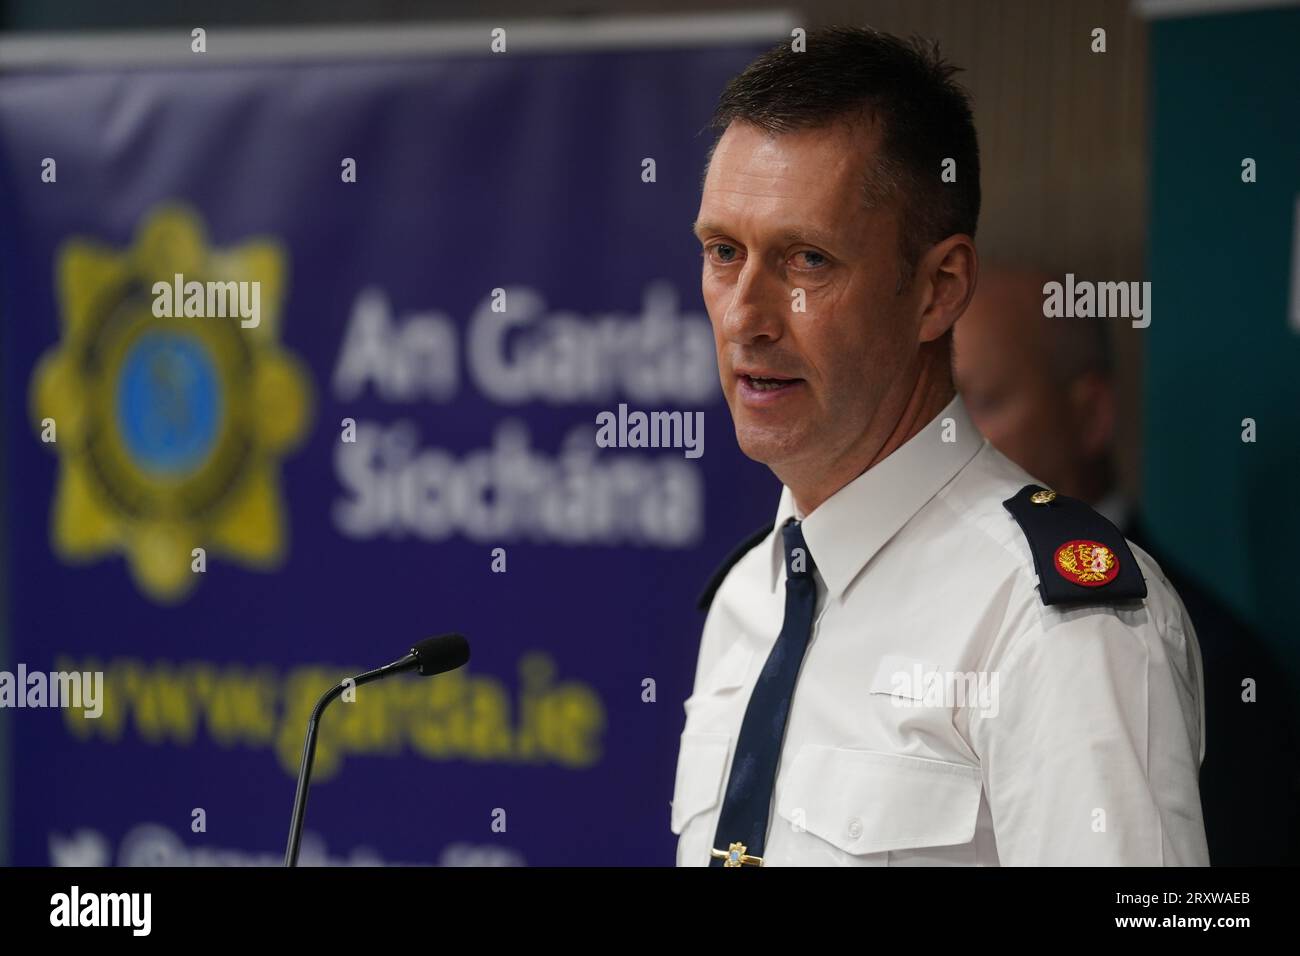 Assistant Commissioner Justin Kelly, Garda Serious and Organised Crime of the Joint Task Force (JTF), comprising of the Revenue Customs Service, Naval Service and An Garda Siochana, during a press conference at Walter Scott House in Dublin, after a Panamanian registered bulk cargo vessel the MV Matthew was escorted into Cobh harbour, Co Cork, by the Irish Navy after a 'significant quantity' of suspected drugs were found onboard. Three men have been arrested on suspicion of organised crime offences. Stock Photo